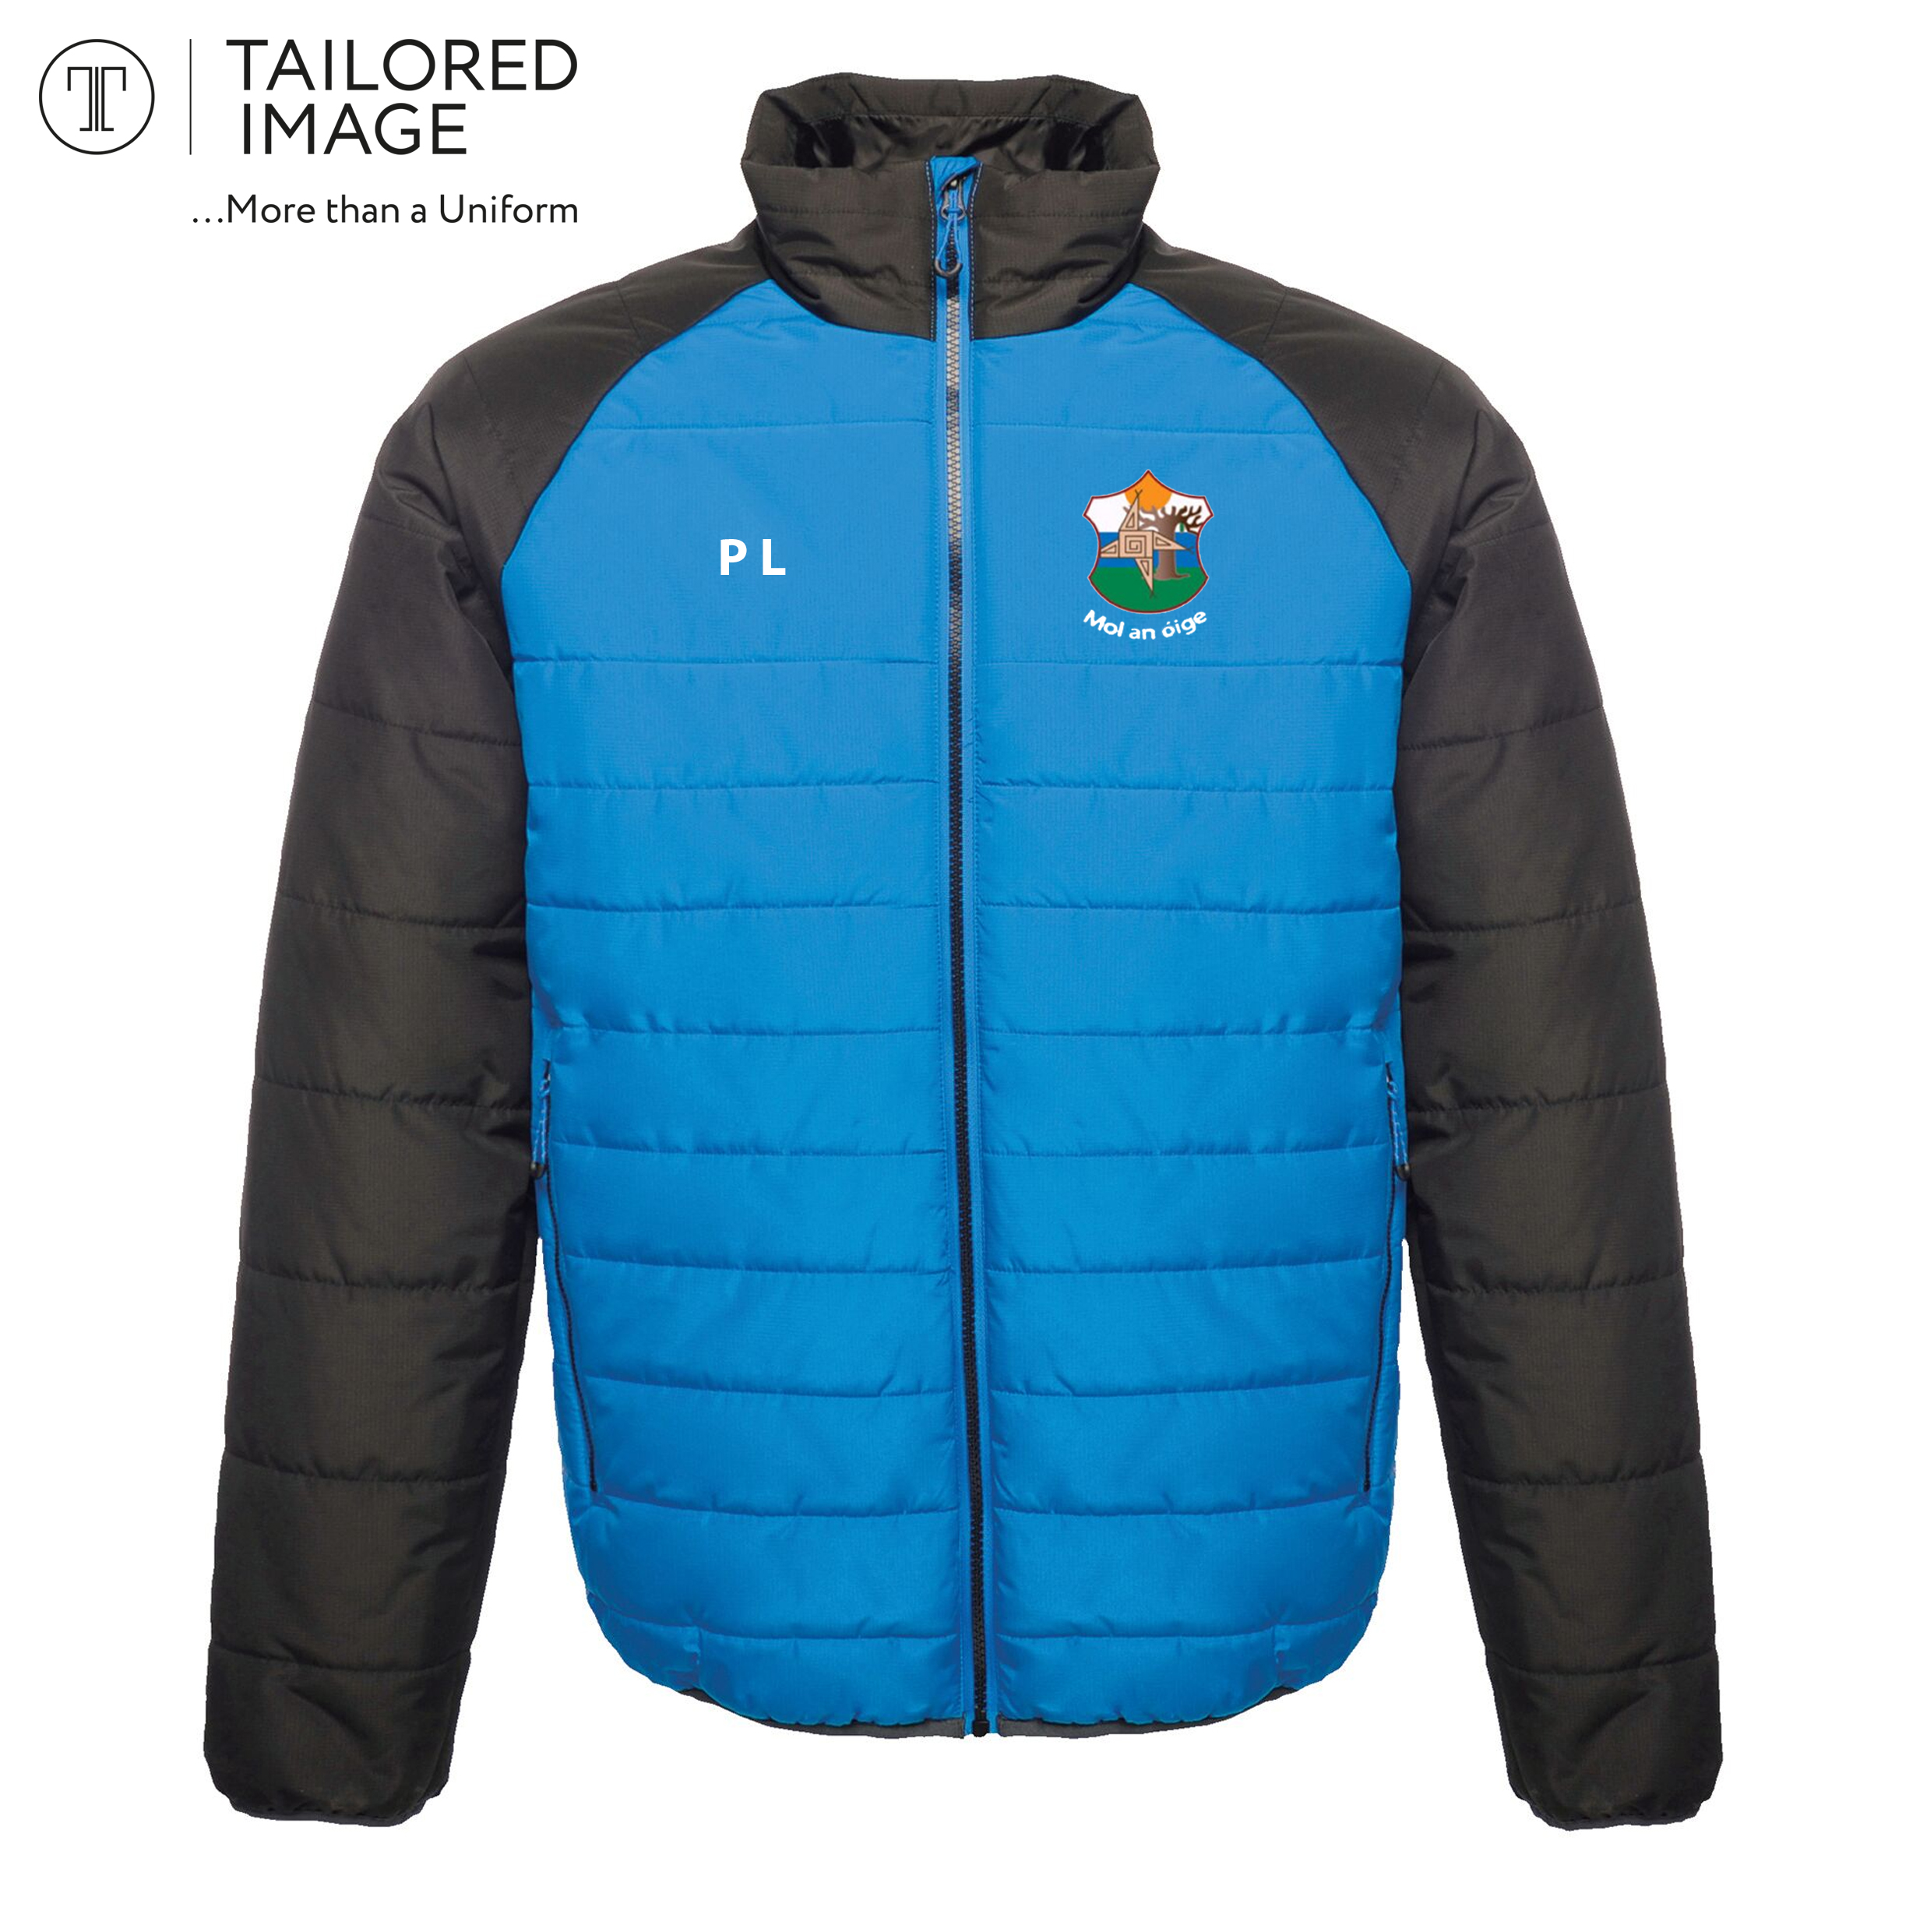 St Brigid’s GAC ‘Supporters Jacket’ Now Available To Purchase